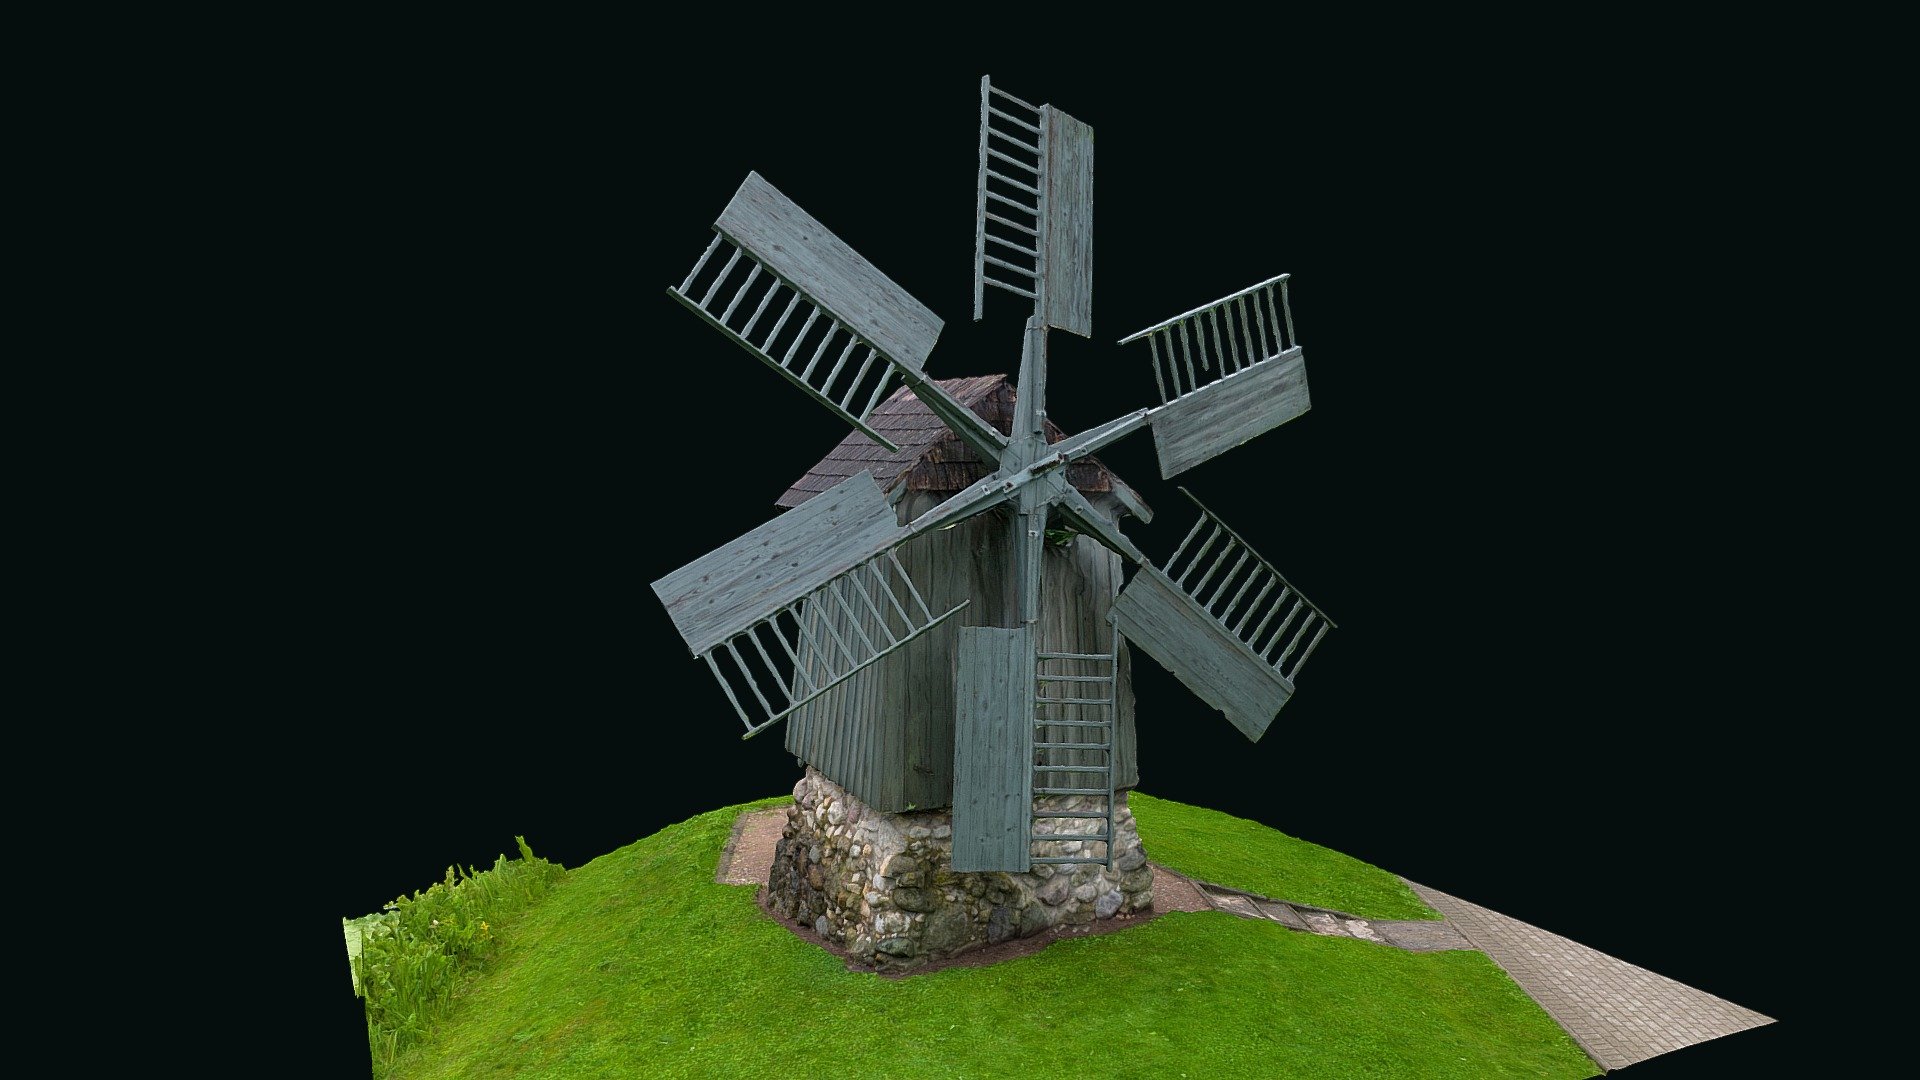 Sometime wide wings of windmills decorated and dominated the landscape. Standing away from the settlements, they looked lonely but powerful, welcoming the wind with all their might.

Bārisu windmill 
Lat: 56.550390
Long: 27.726050 
Latvia

Photogrammetry reconstruction in RealityCapture from 124 images. © Saulius Zaura www.dronepartner.lt 2023 - Bārisu windmill - 3D model by Saulius.Zaura 3d model